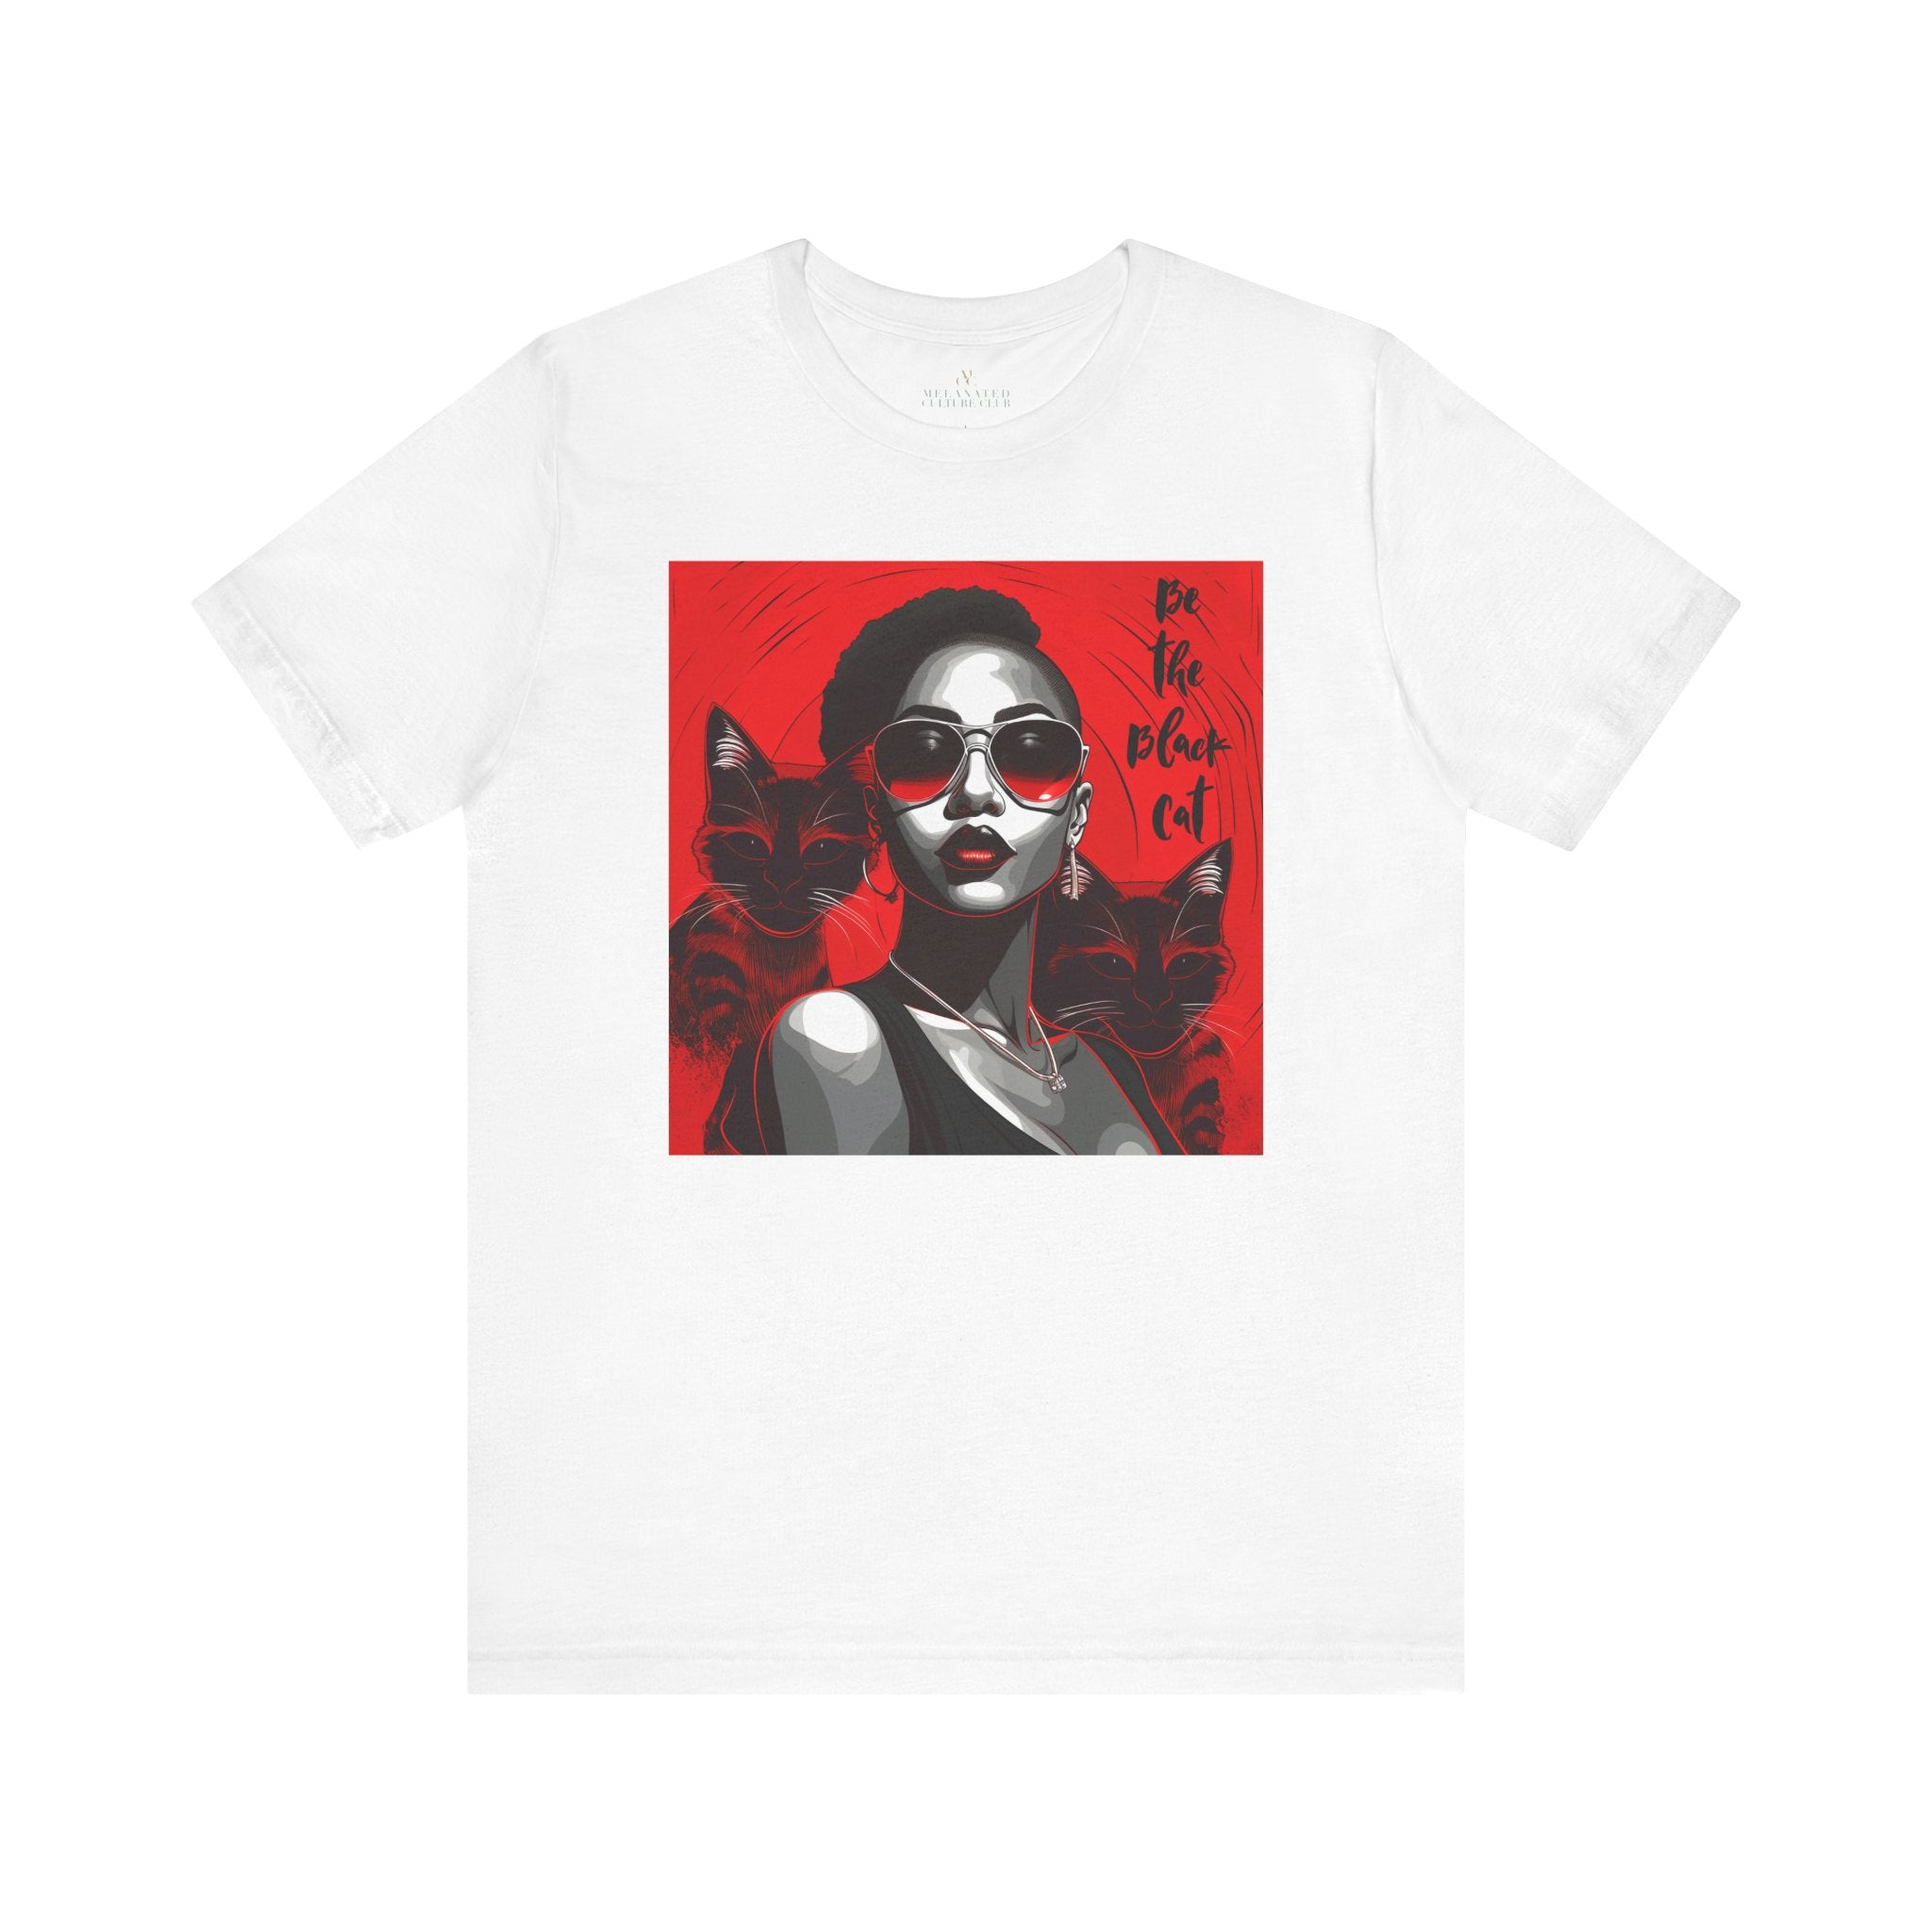 Black Woman Be the Black Cat Tee Shirt in white.